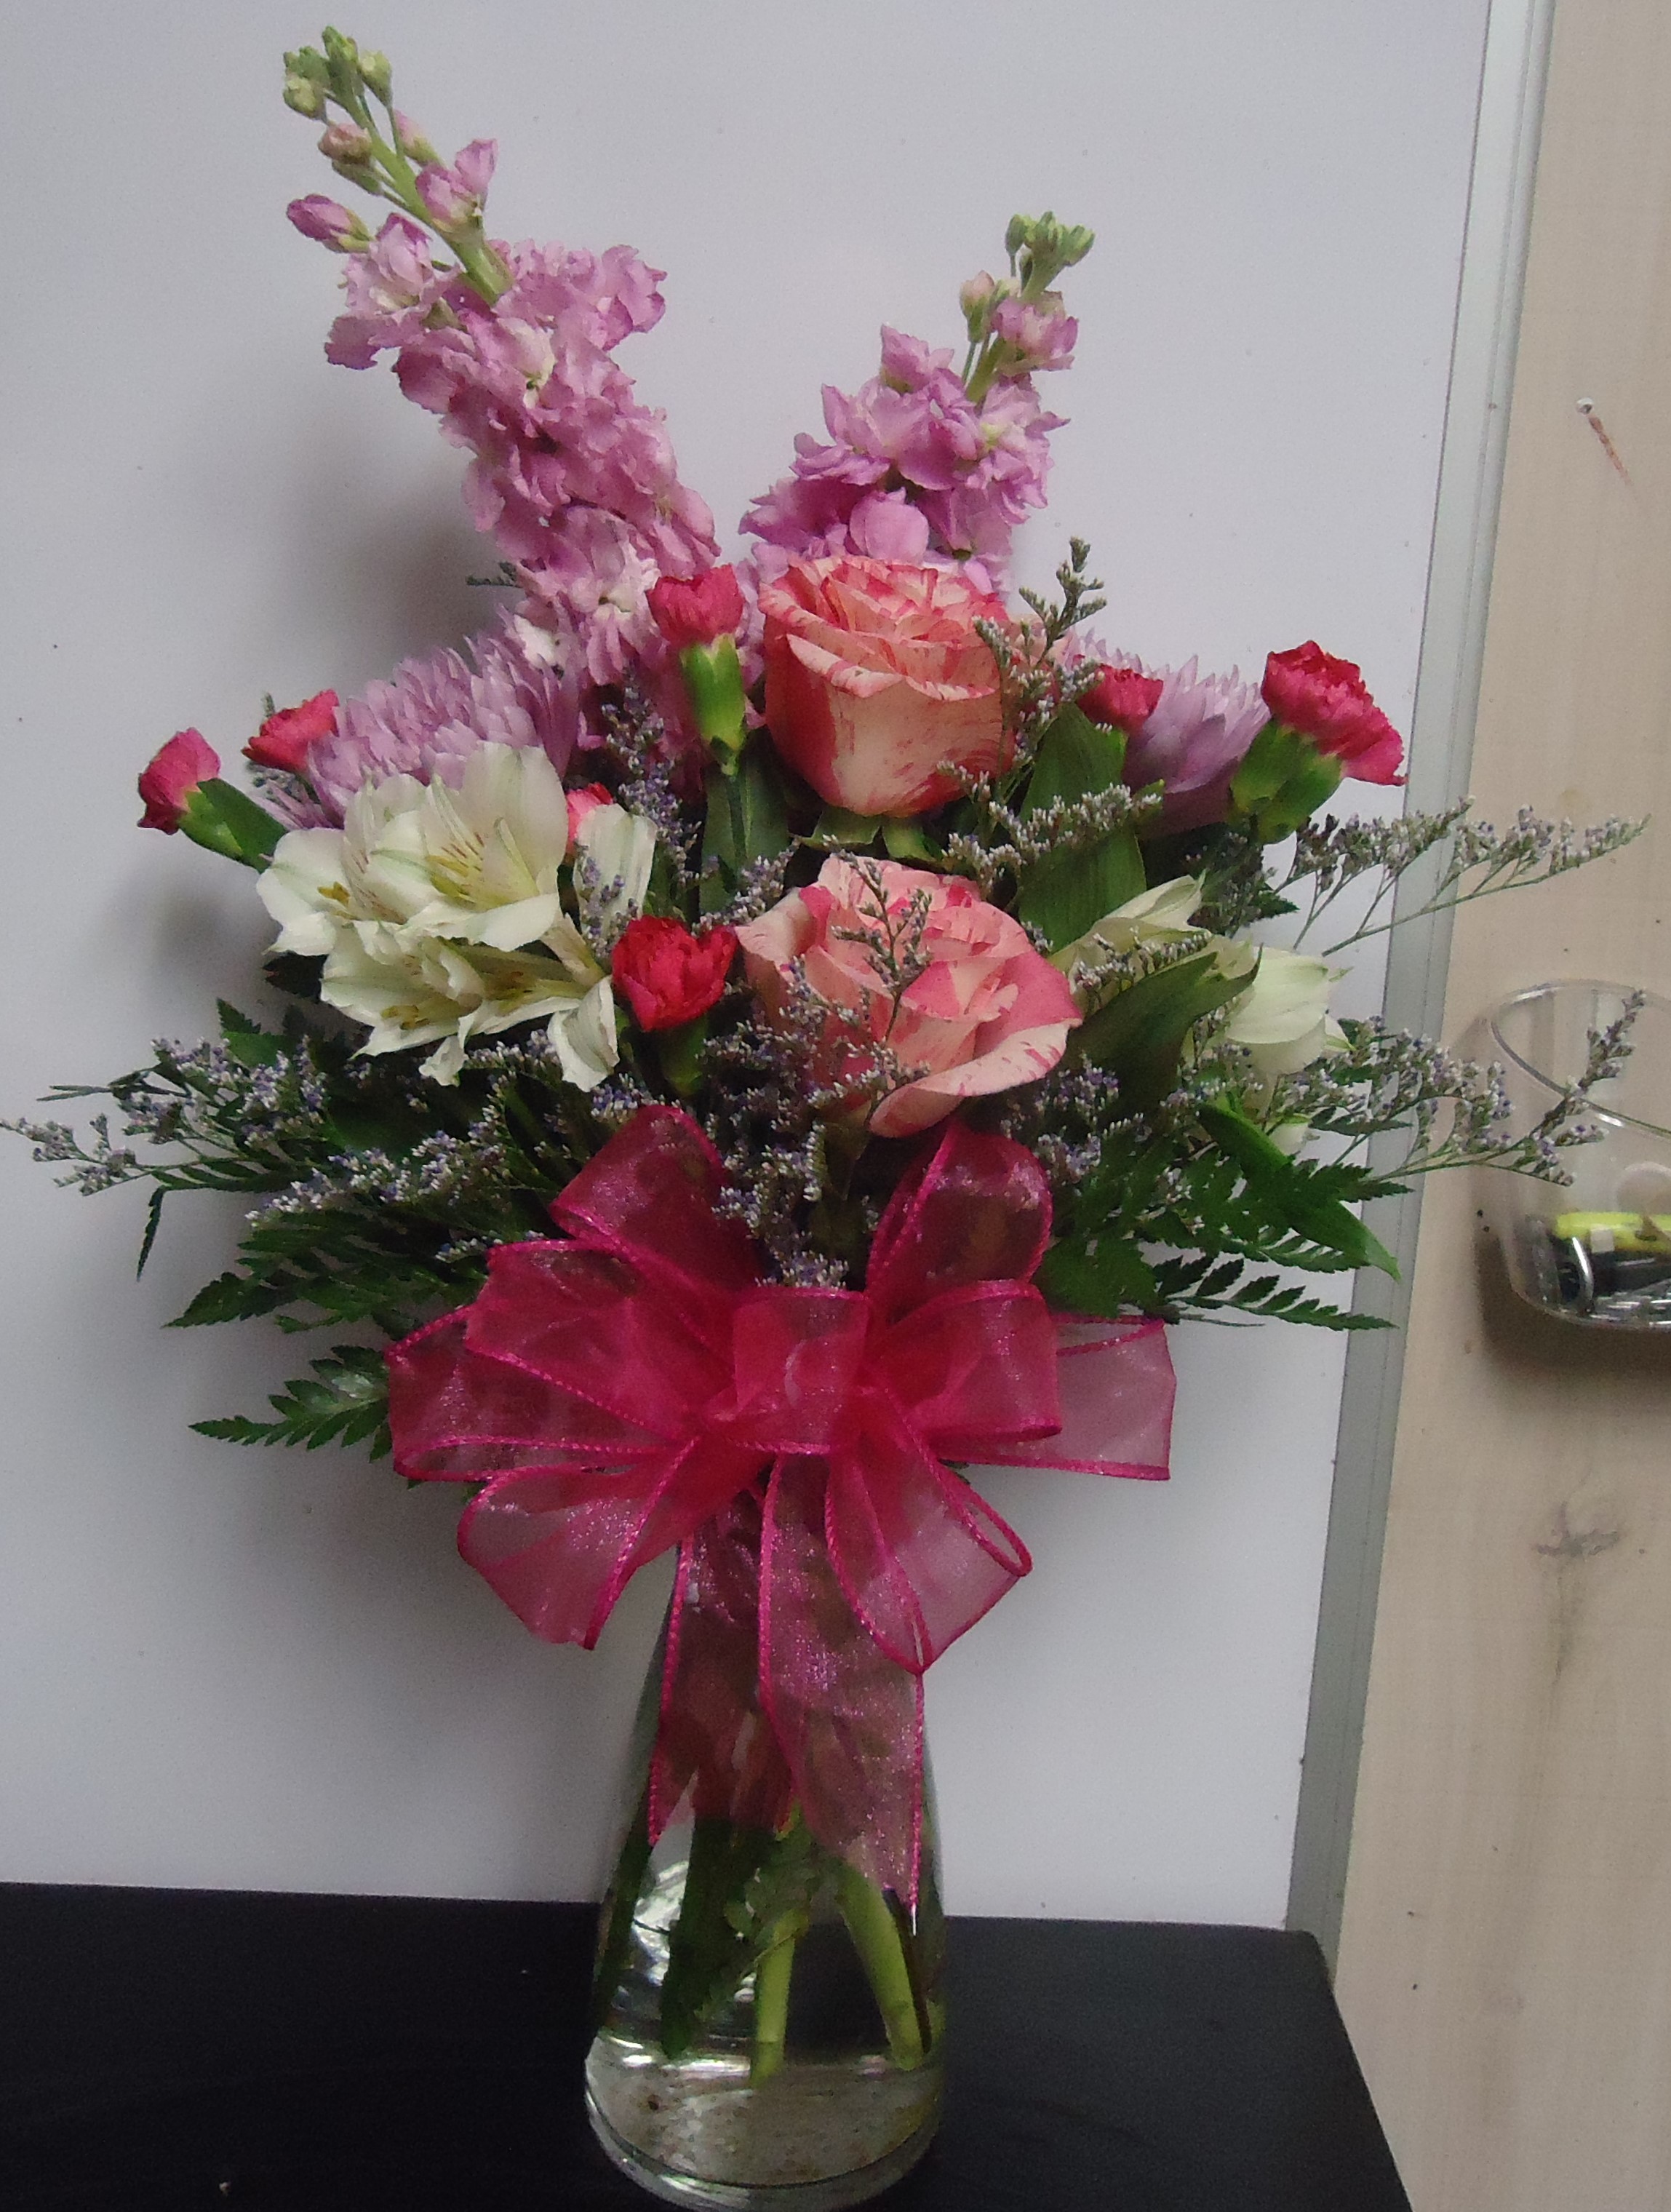 (7) "Fresh" Mix Vase
$45.00  (& Up)
(Colors & Flowers May Vary)